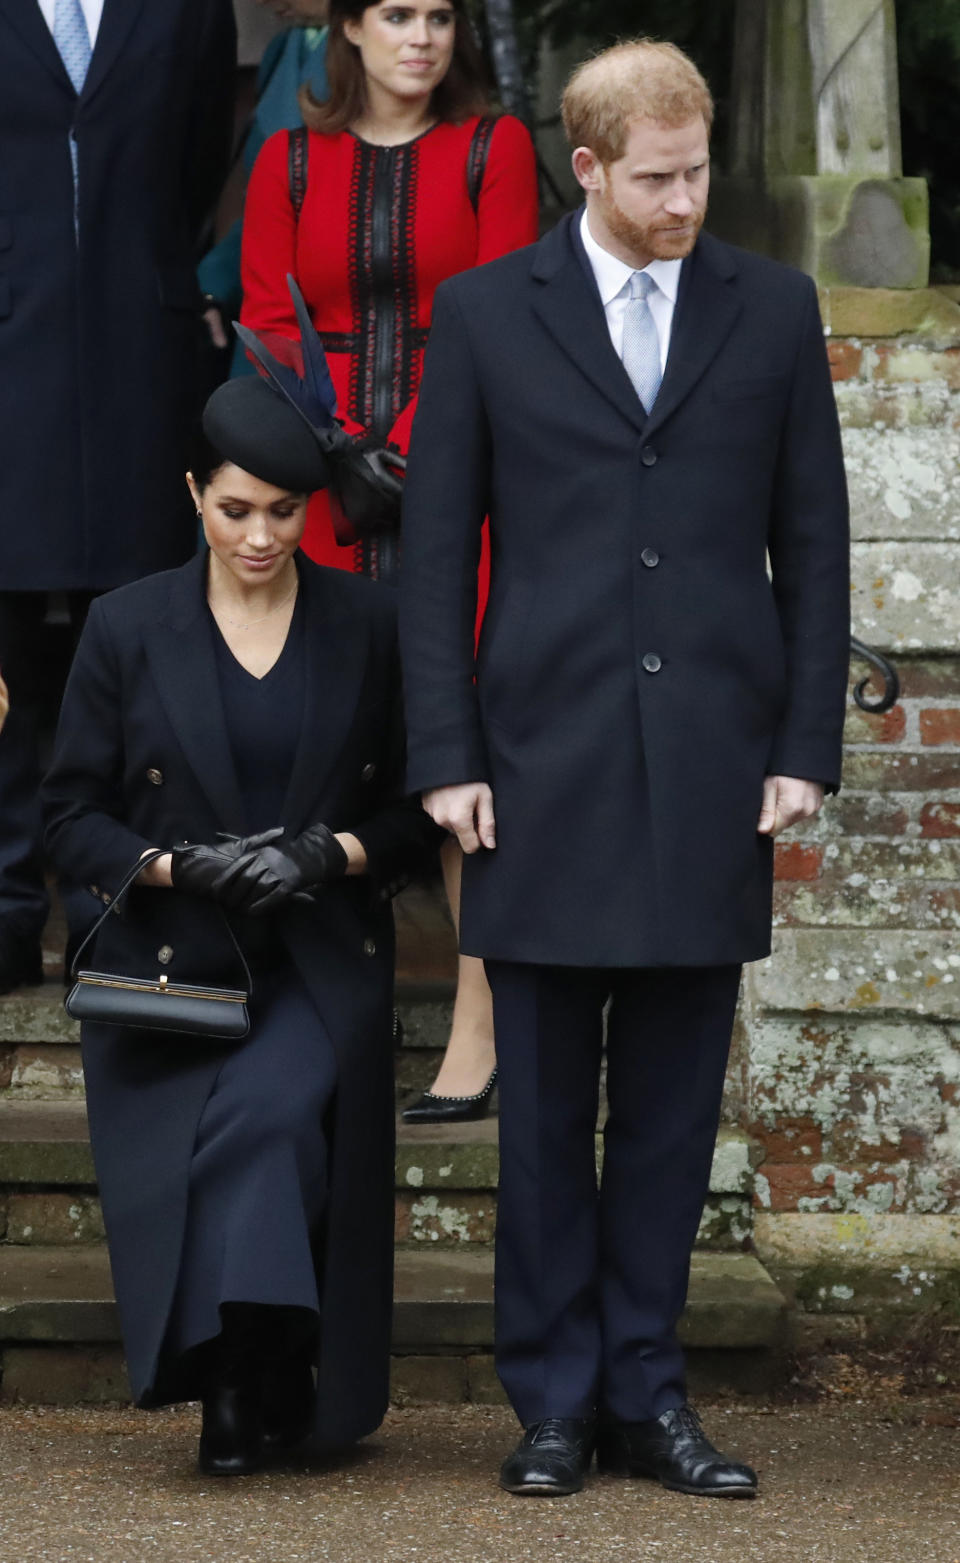 Britain's Prince Harry, stands with Meghan, Duchess of Sussex as she does a curtsy to Britain's Queen Elizabeth II as she leaves in a car after attending the Christmas day service at St Mary Magdalene Church in Sandringham in Norfolk, England, Tuesday, Dec. 25, 2018. (AP Photo/Frank Augstein)